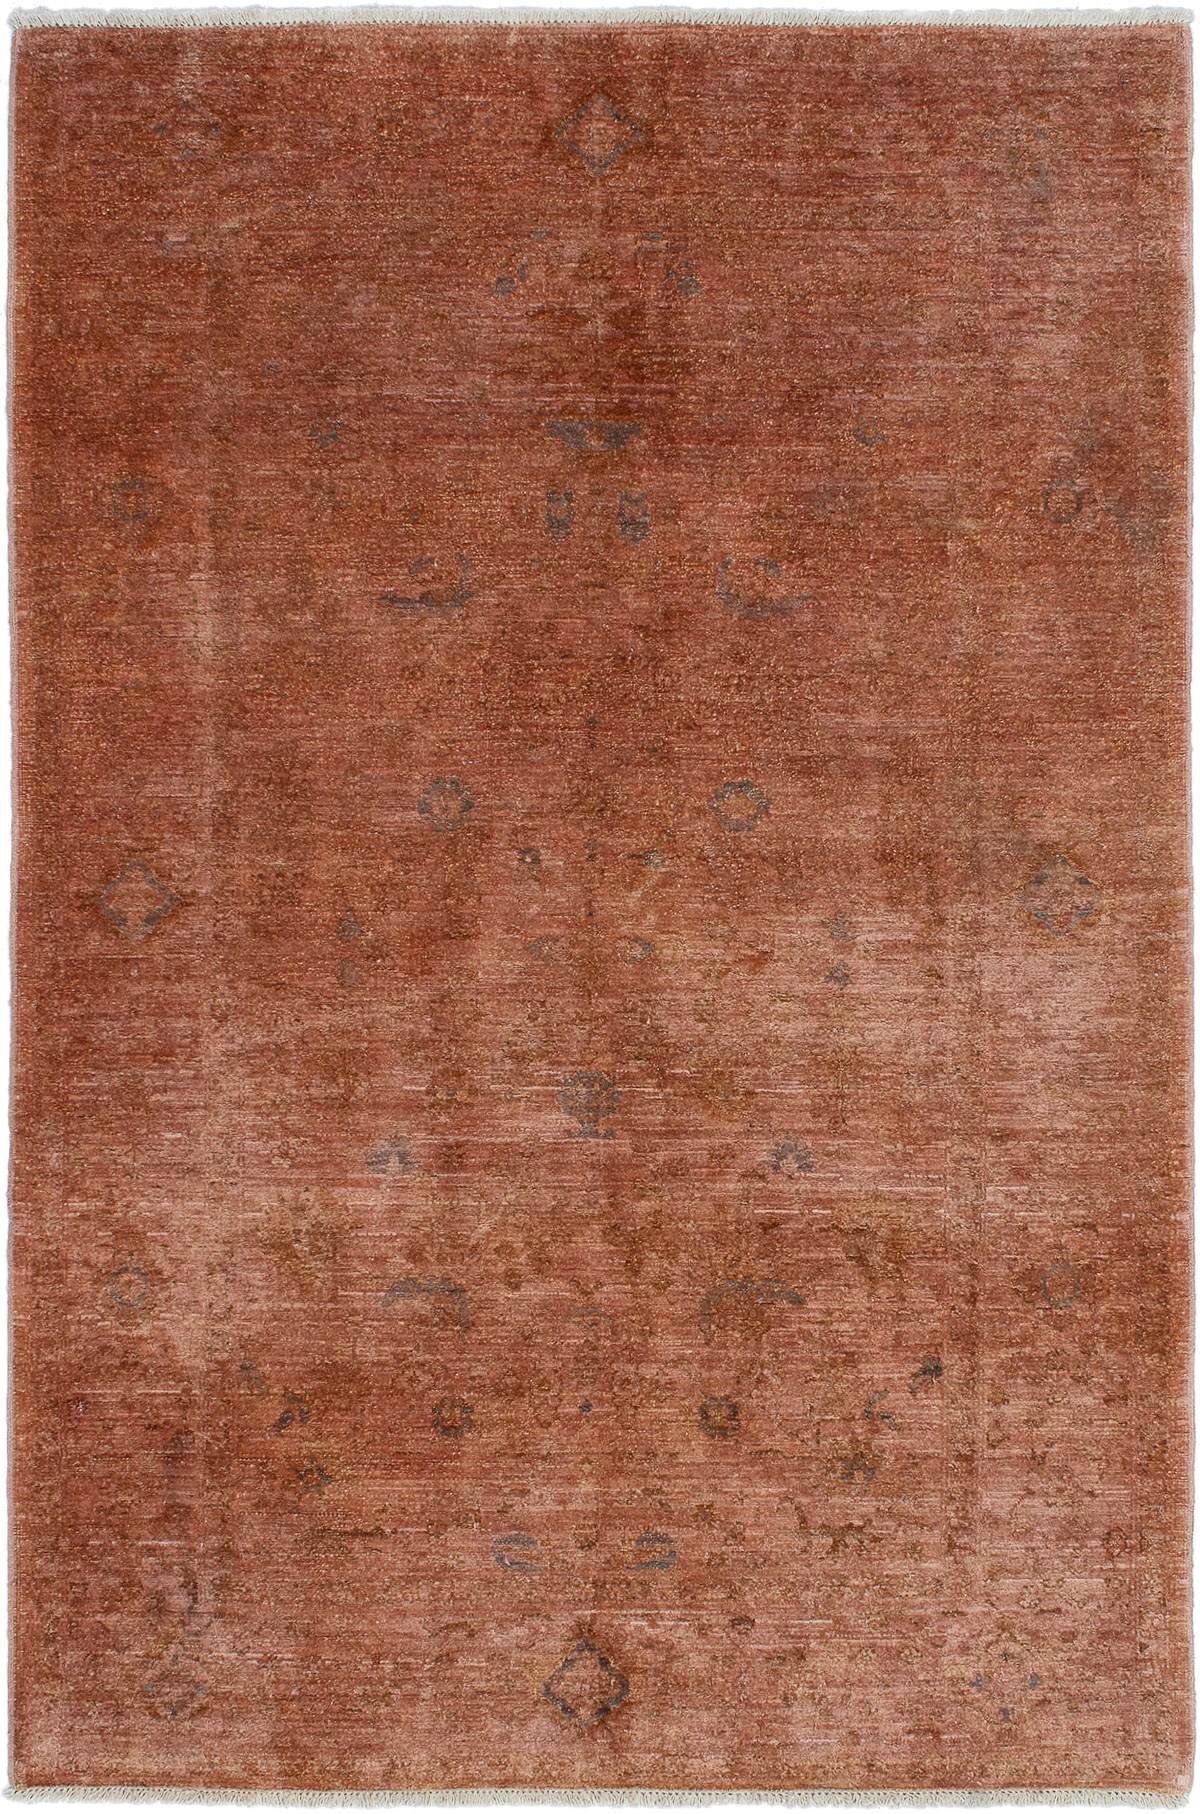 Hand-knotted Color transition Copper Wool Rug 5'2" x 7'9" Size: 5'2" x 7'9"  